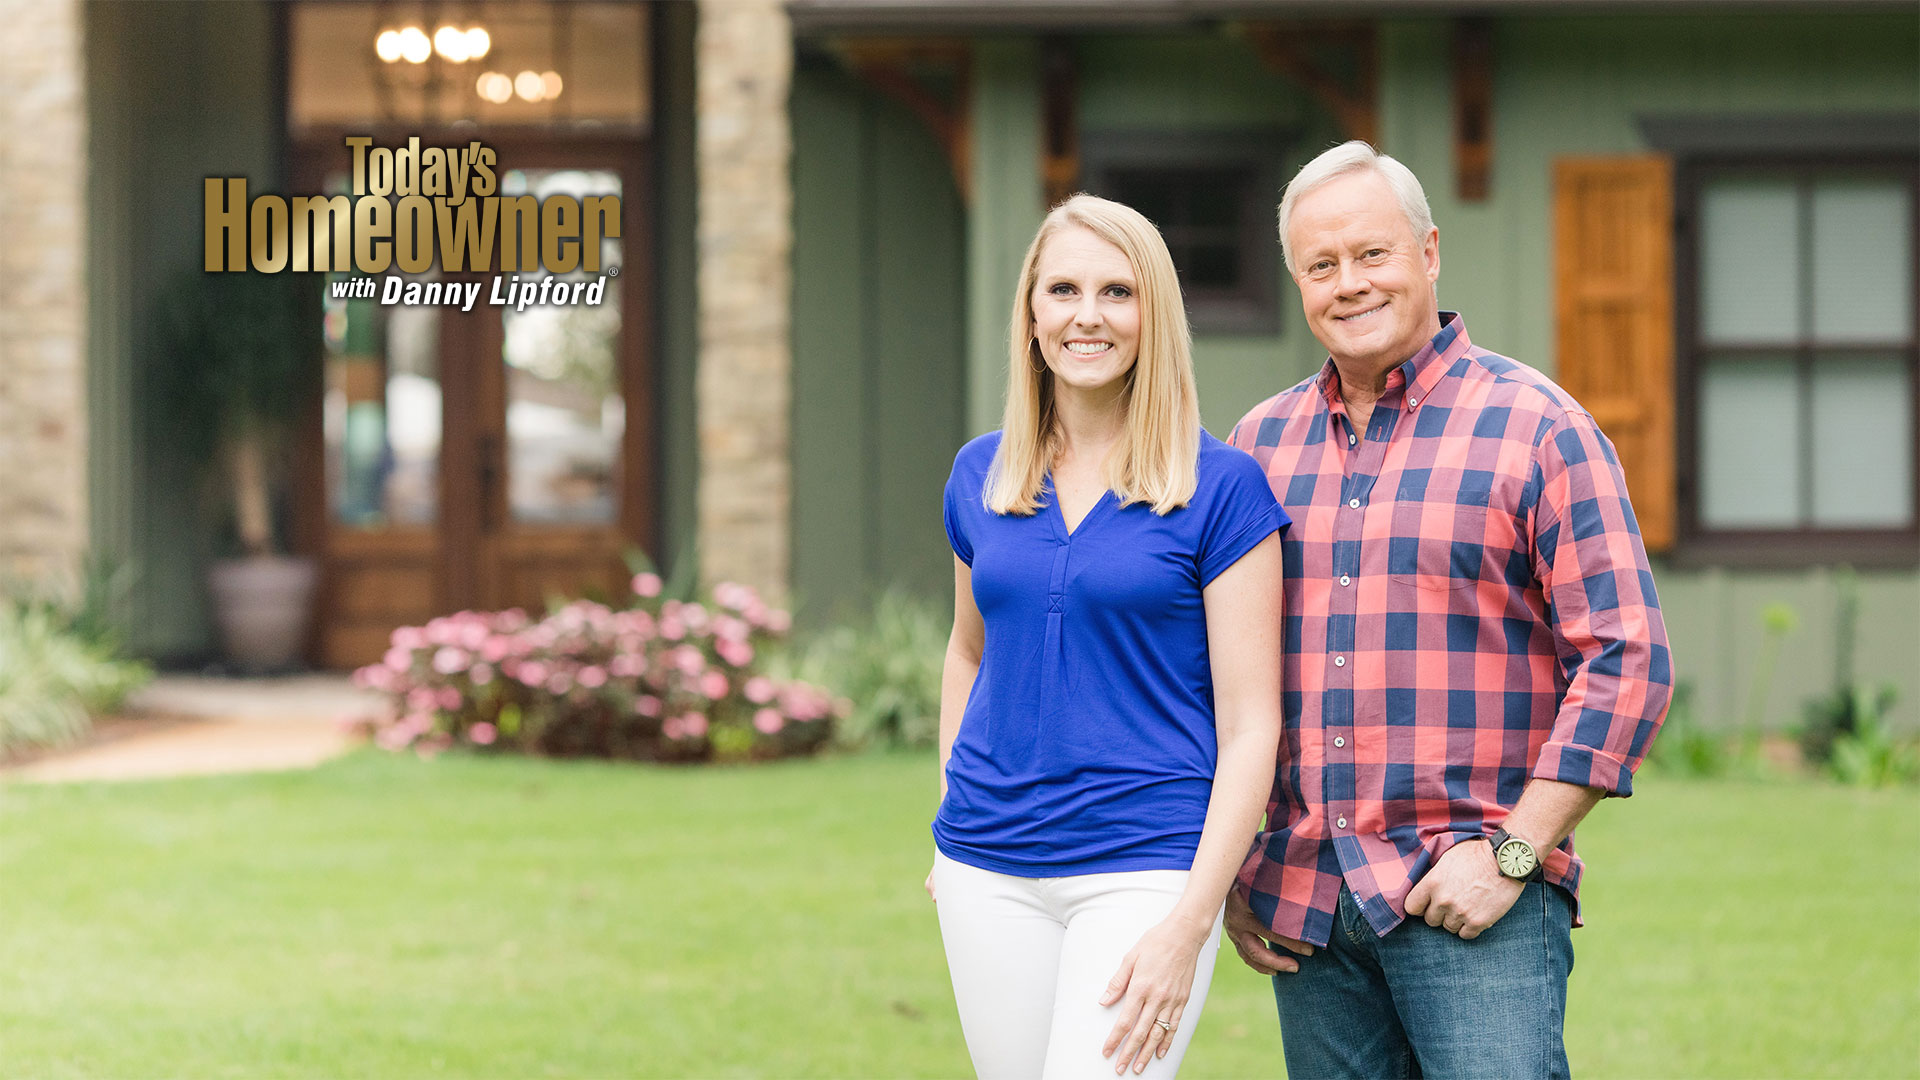 “Today’s Homeowner” hosts Danny Lipford and Chelsea Lipford Wolf, standing in front of a house